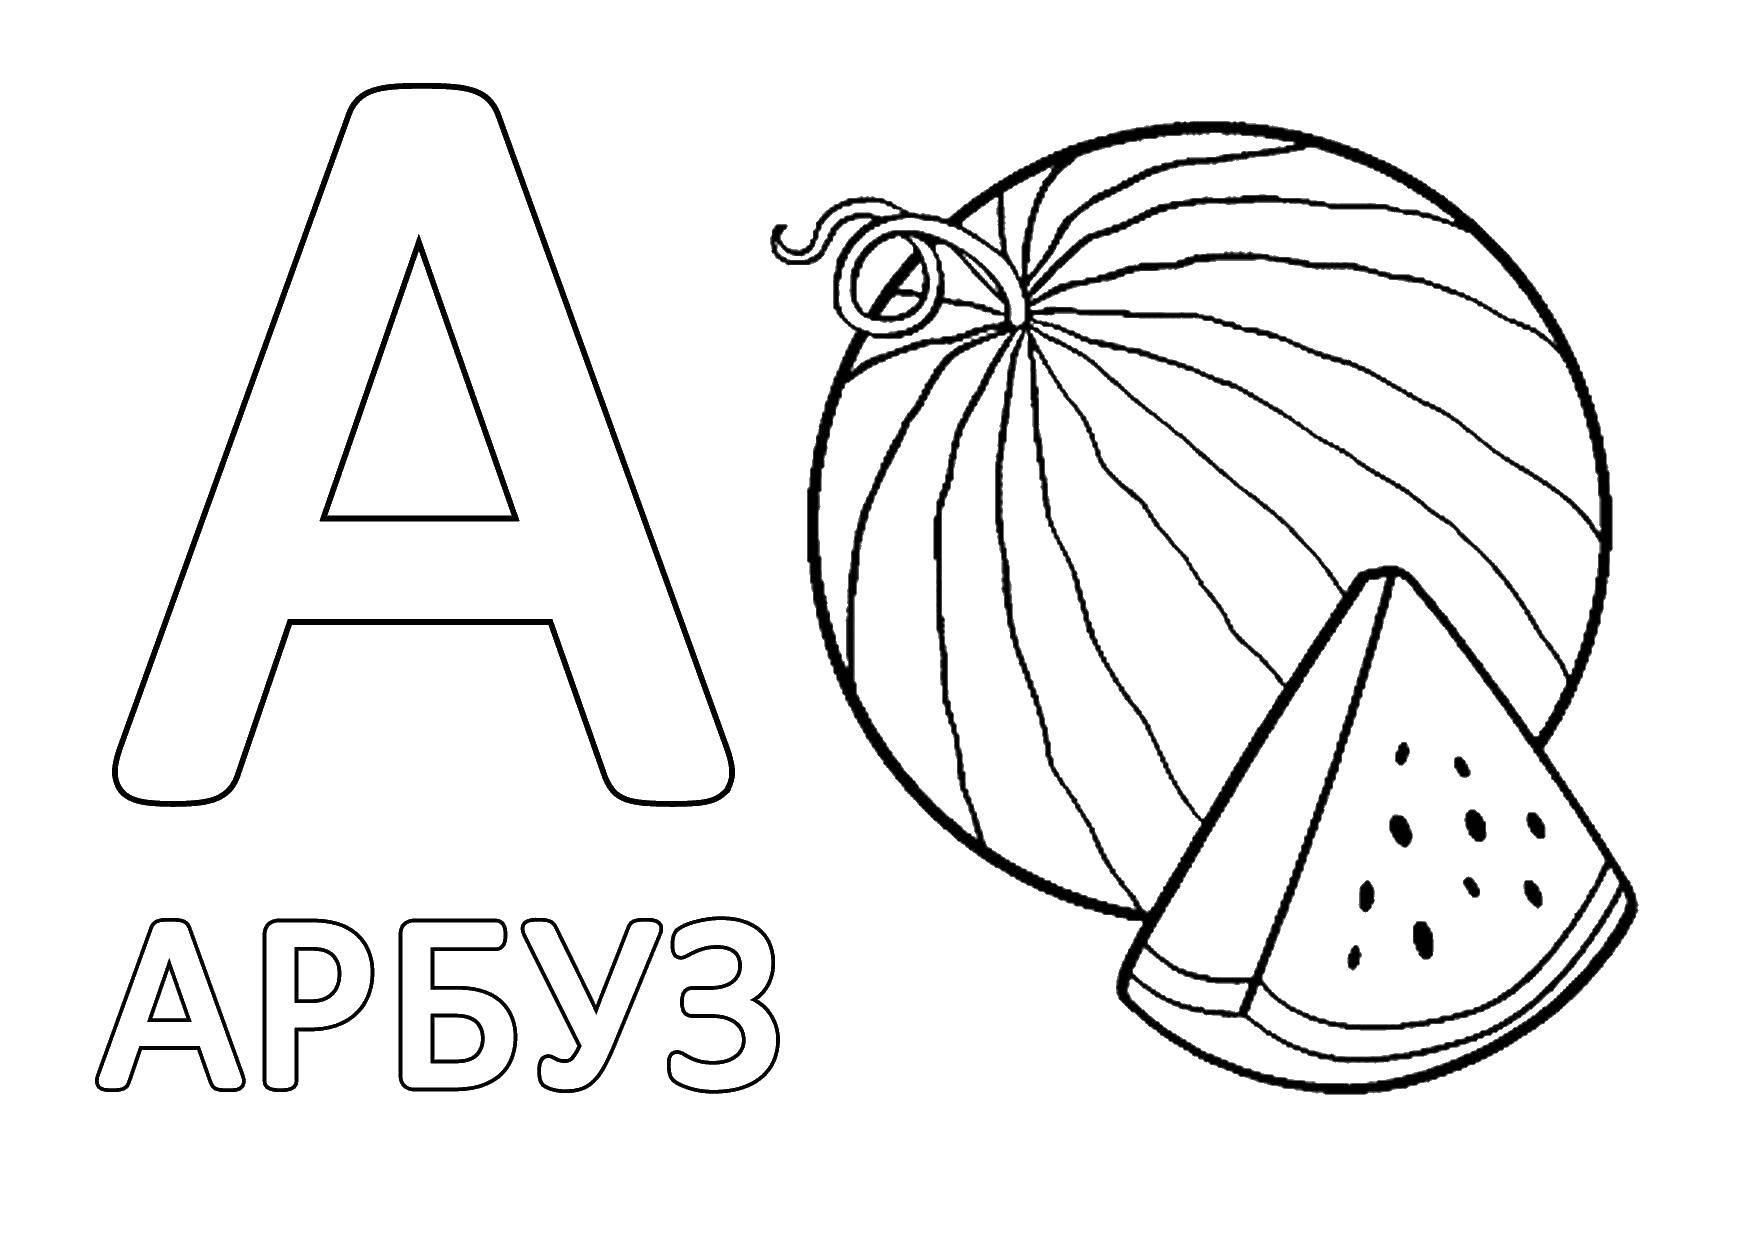 Coloring Watermelon. Category letters. Tags:  watermelon, slice, letters.